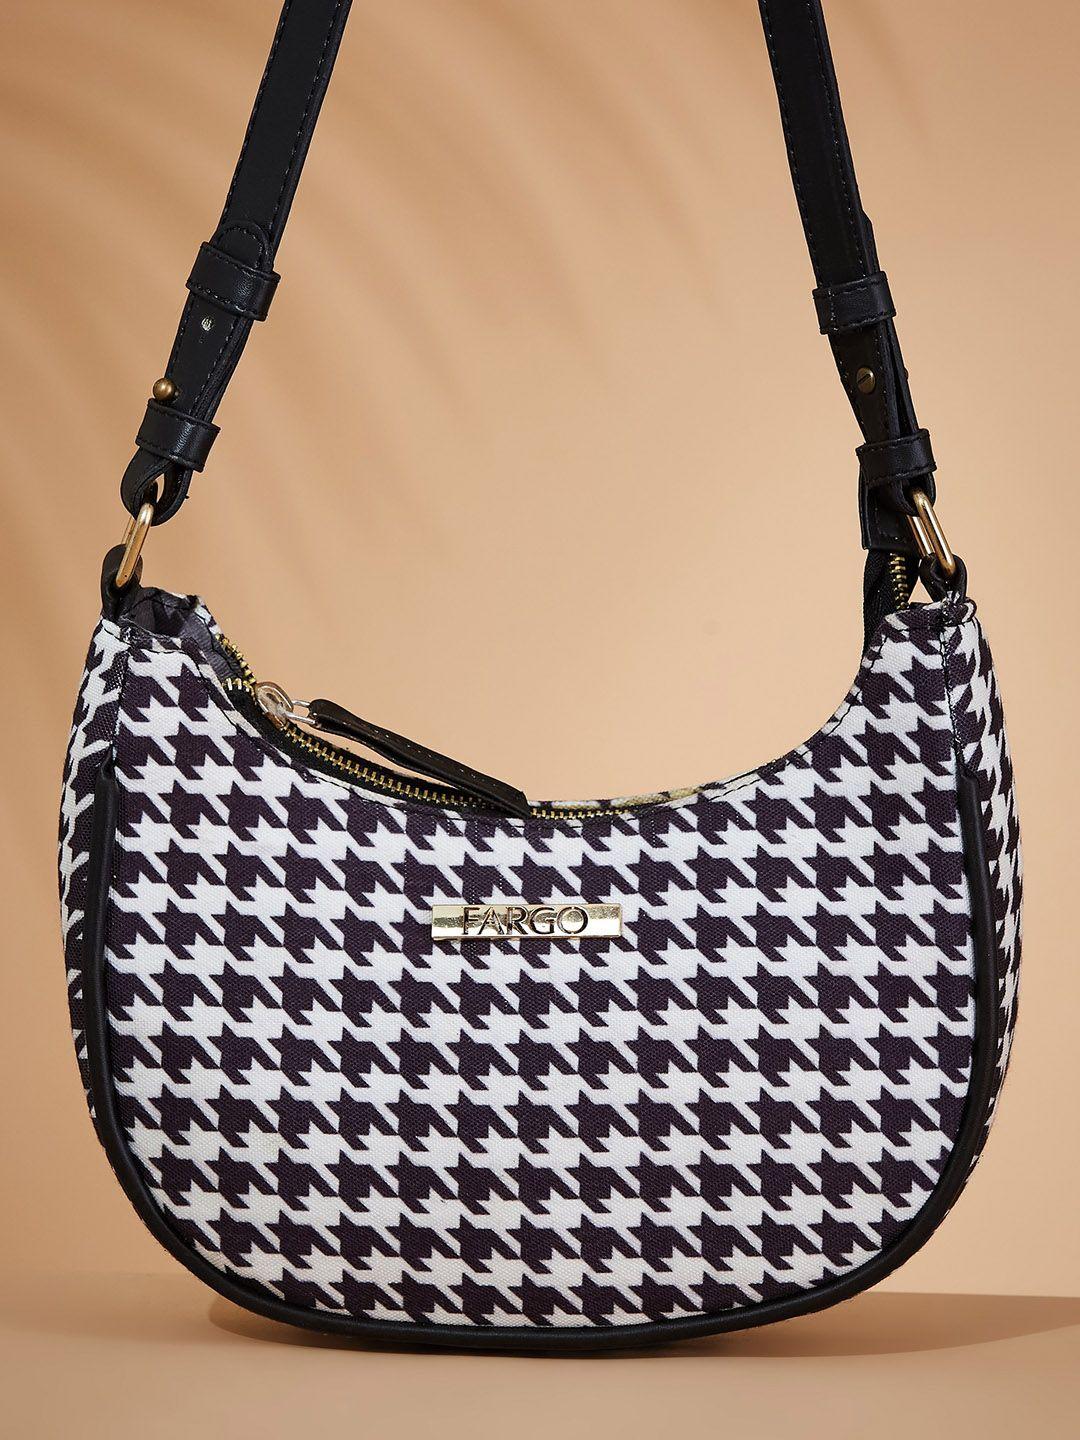 fargo multicoloured geometric printed structured hobo bag with cut work